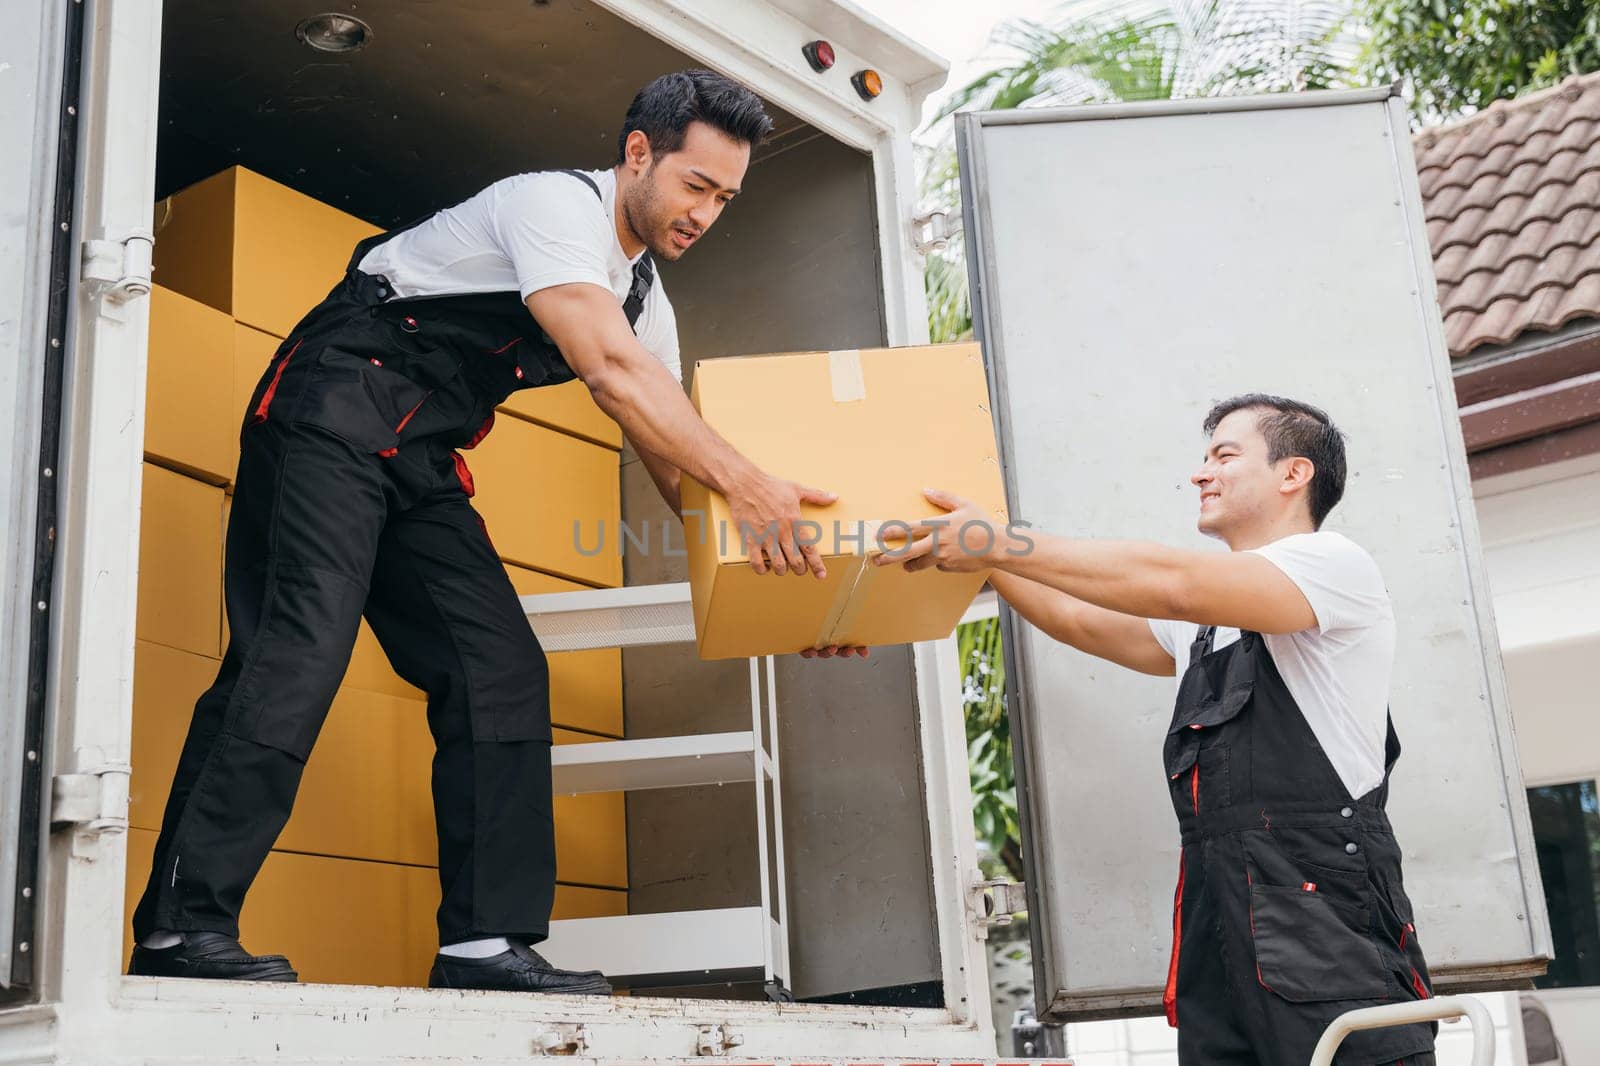 Teamwork in action, removal service workers unload boxes and furniture from the truck into the new home. Their efficiency ensures a smooth move and brings happiness. Moving Day by Sorapop